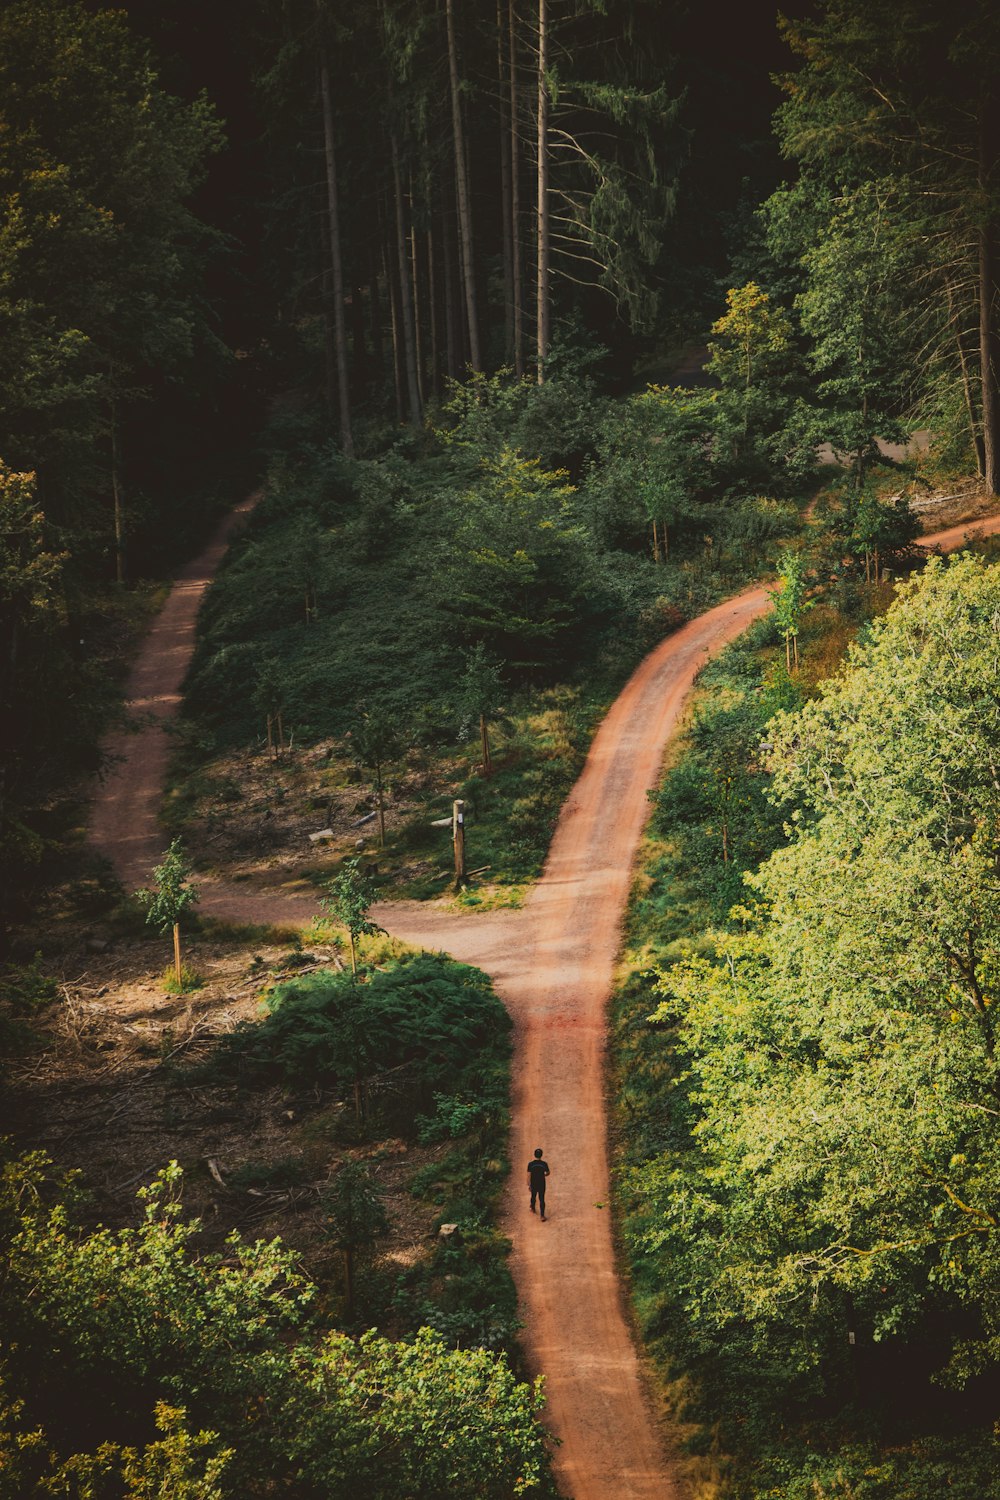 a person walking on a dirt path in a forest